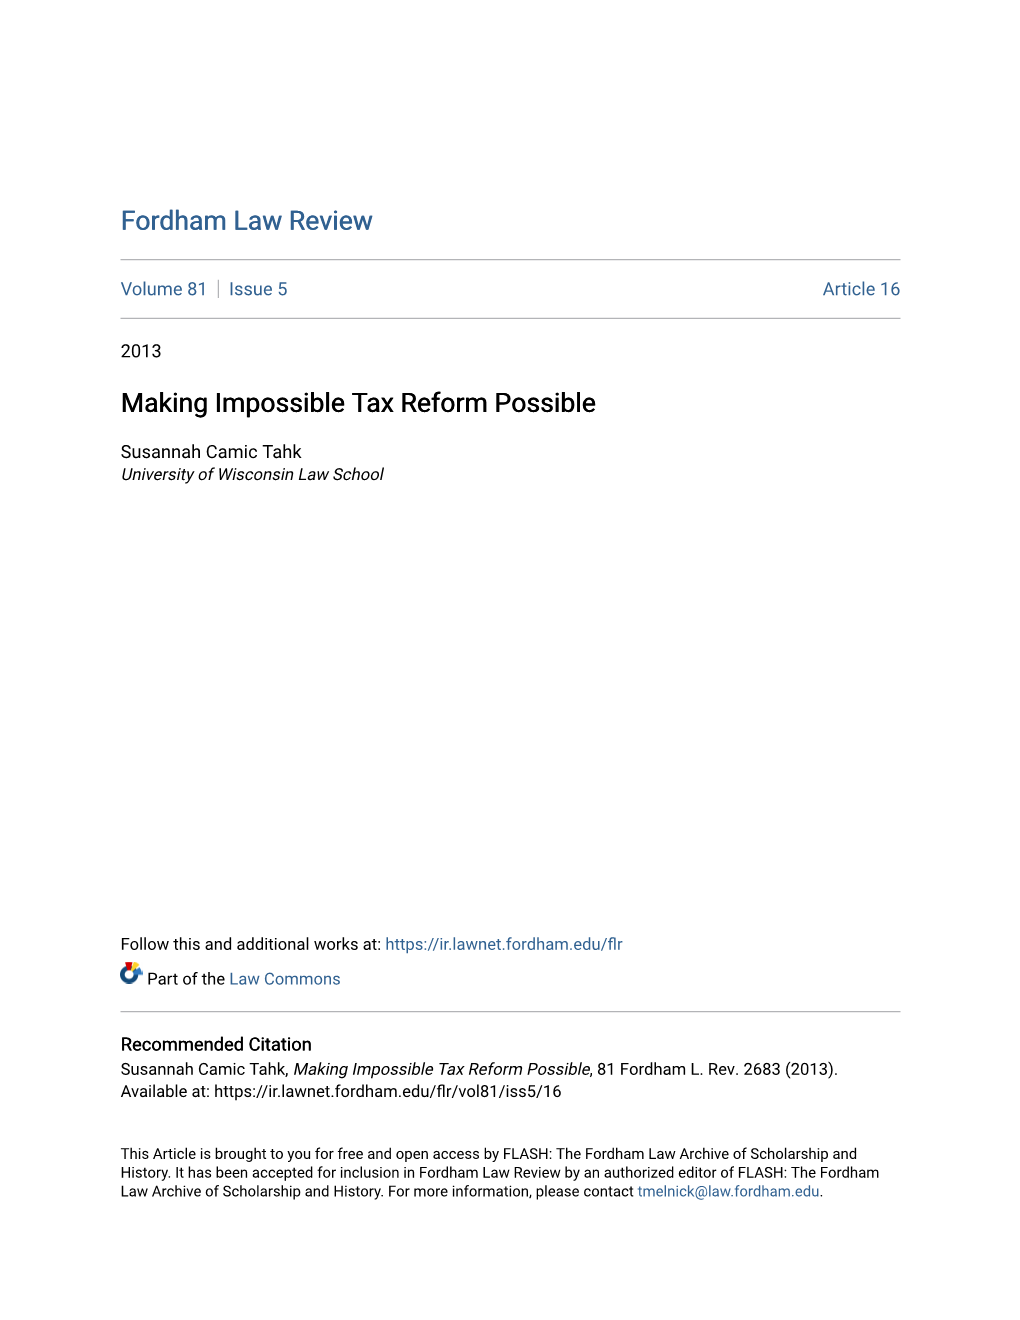 Making Impossible Tax Reform Possible